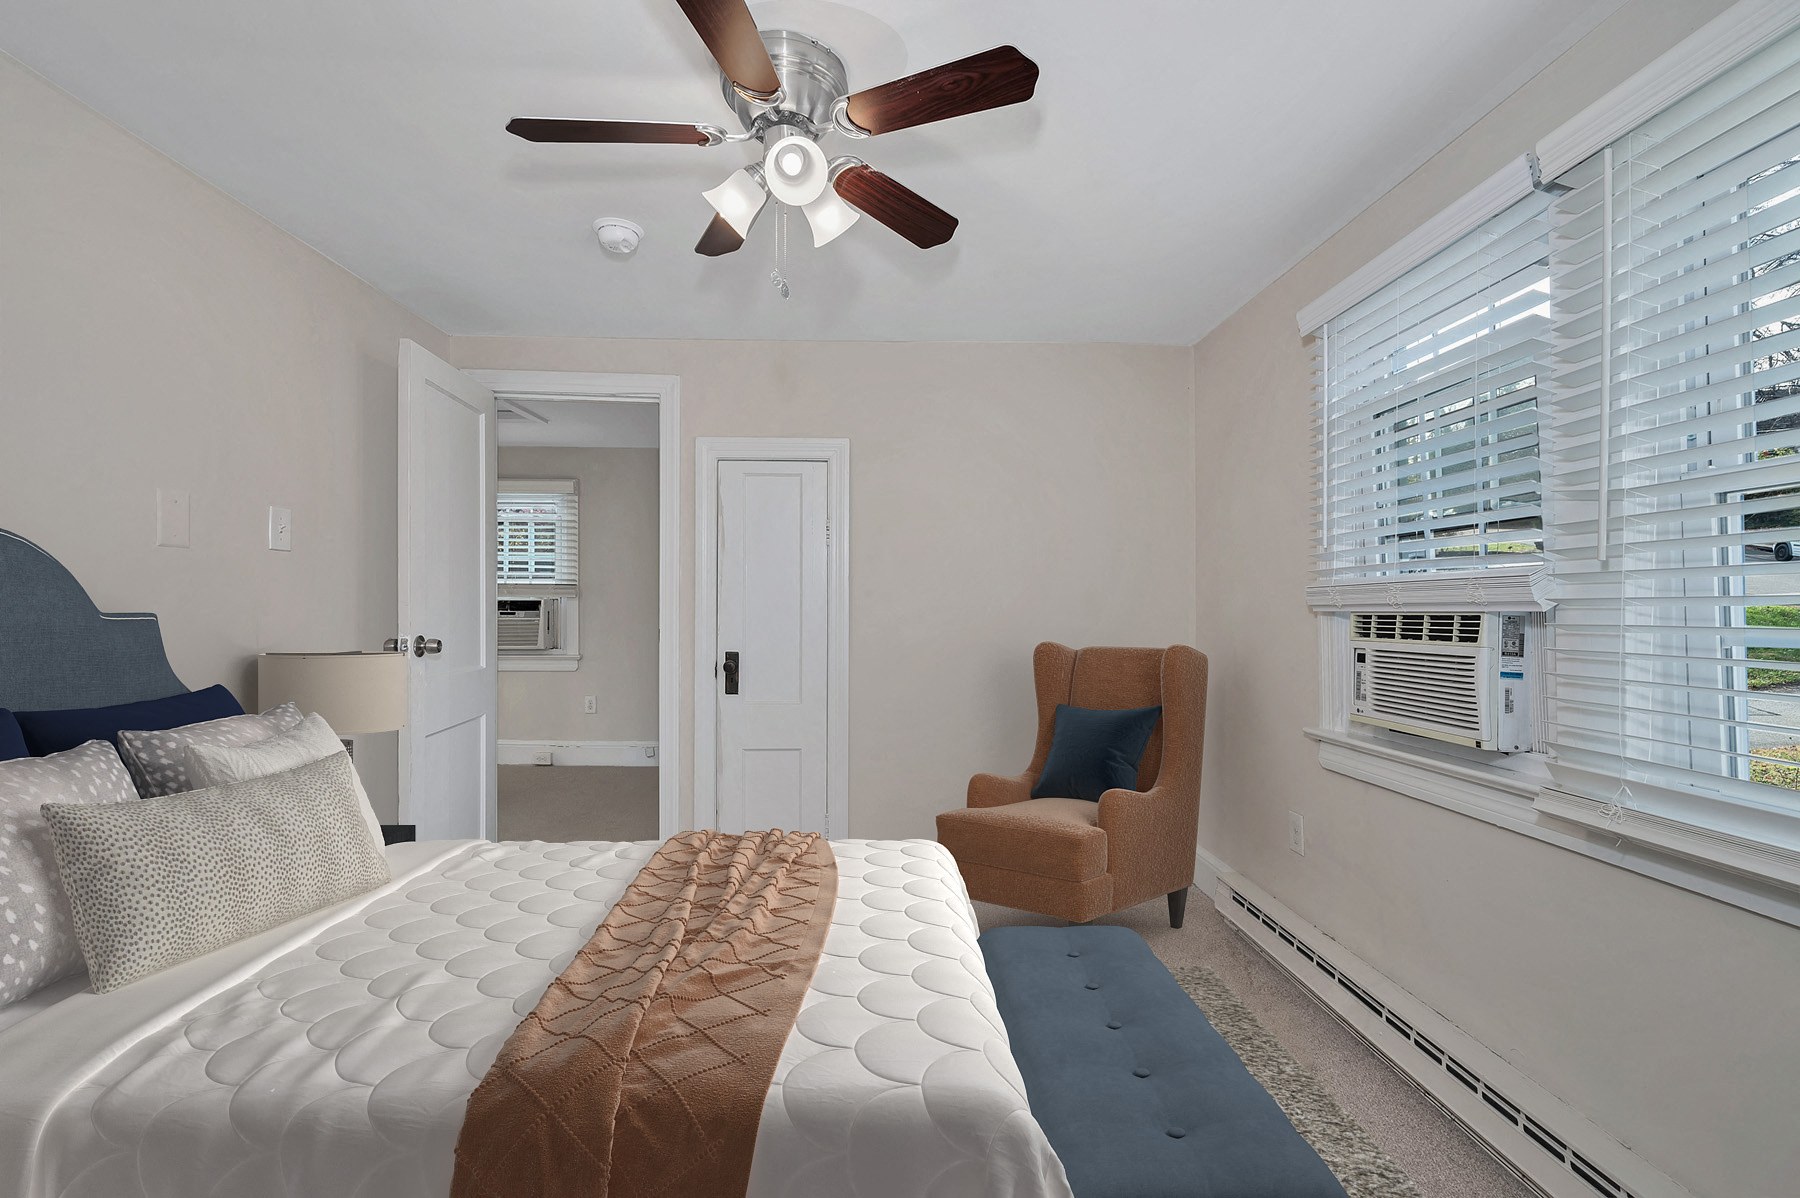 Queen size bedroom with ceiling fan